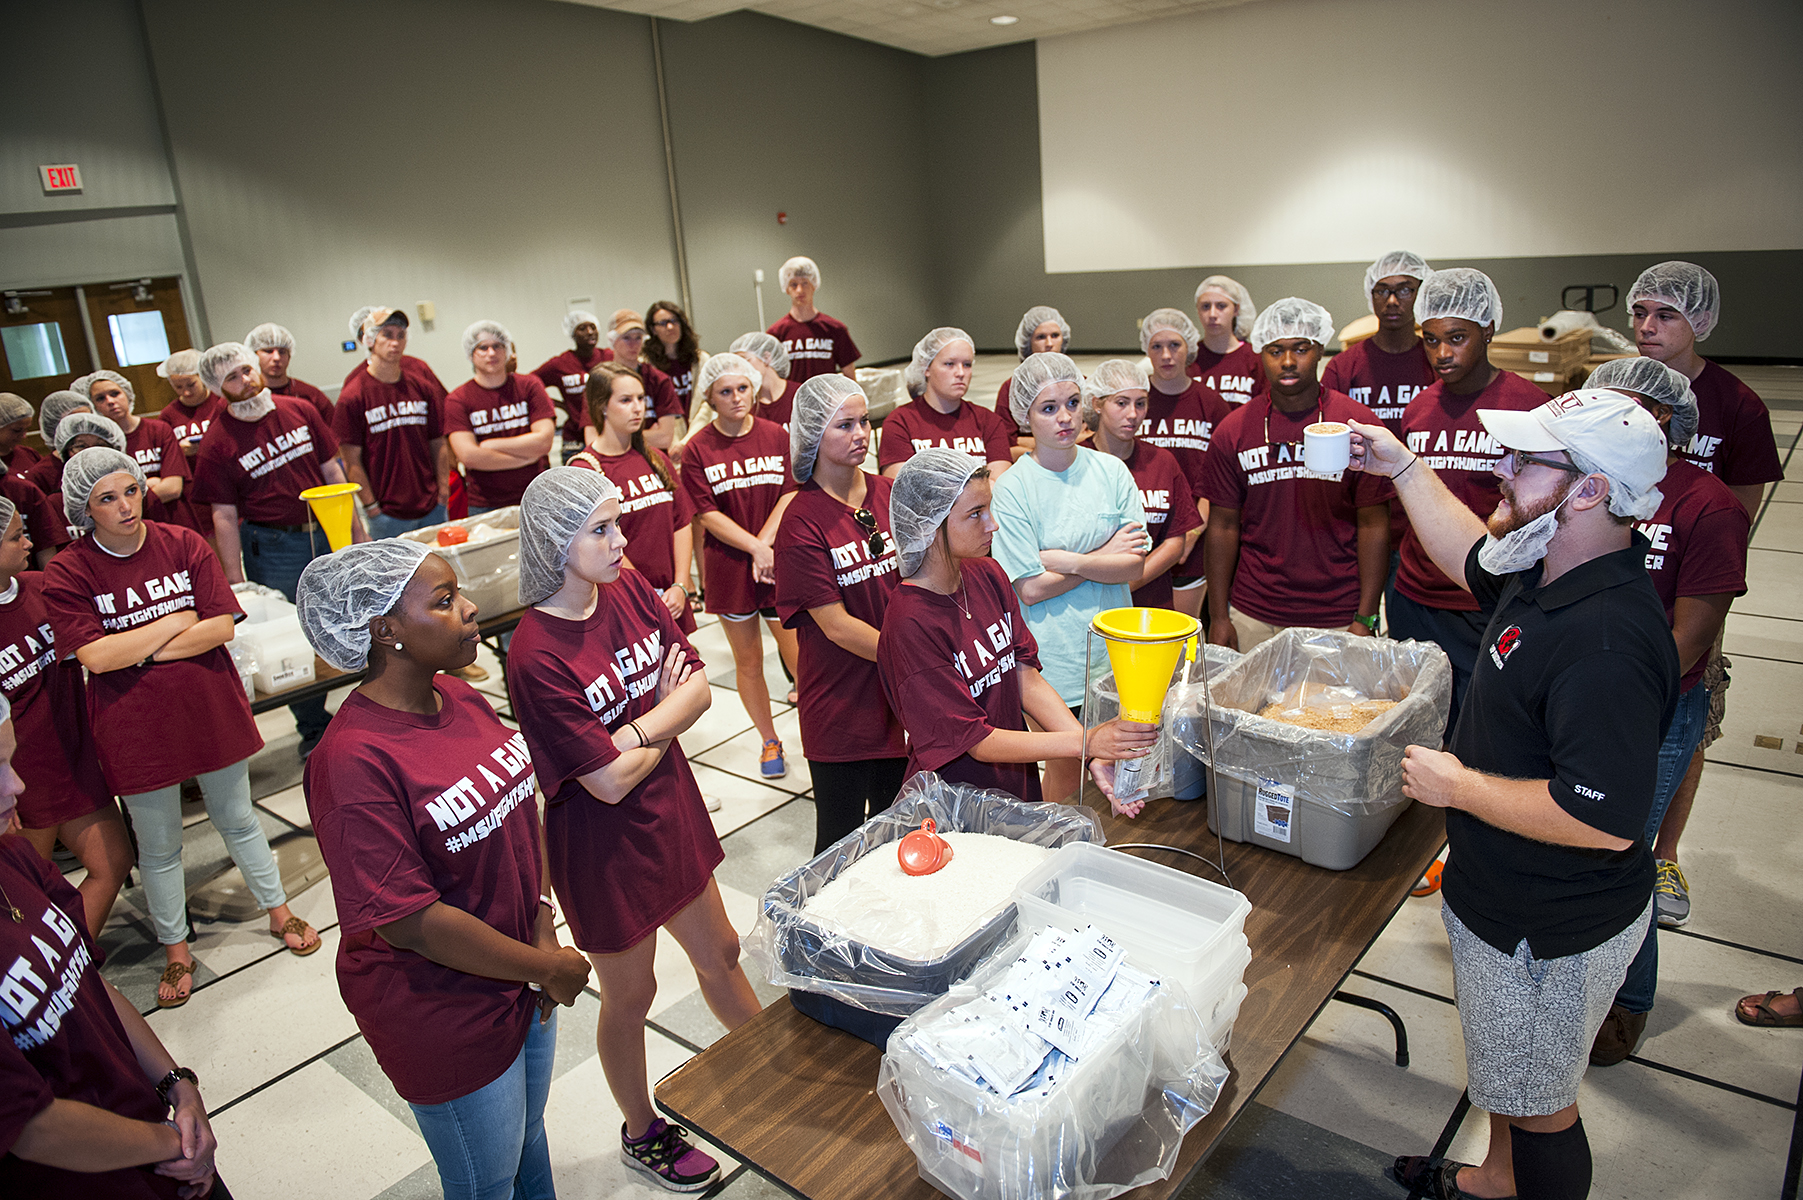 Matt Casteel, right, of the international hunger relief organization Stop Hunger Now, directs True Maroon freshmen as they prepare to package 10,000 meals to aid in the world-wide fight against hunger.